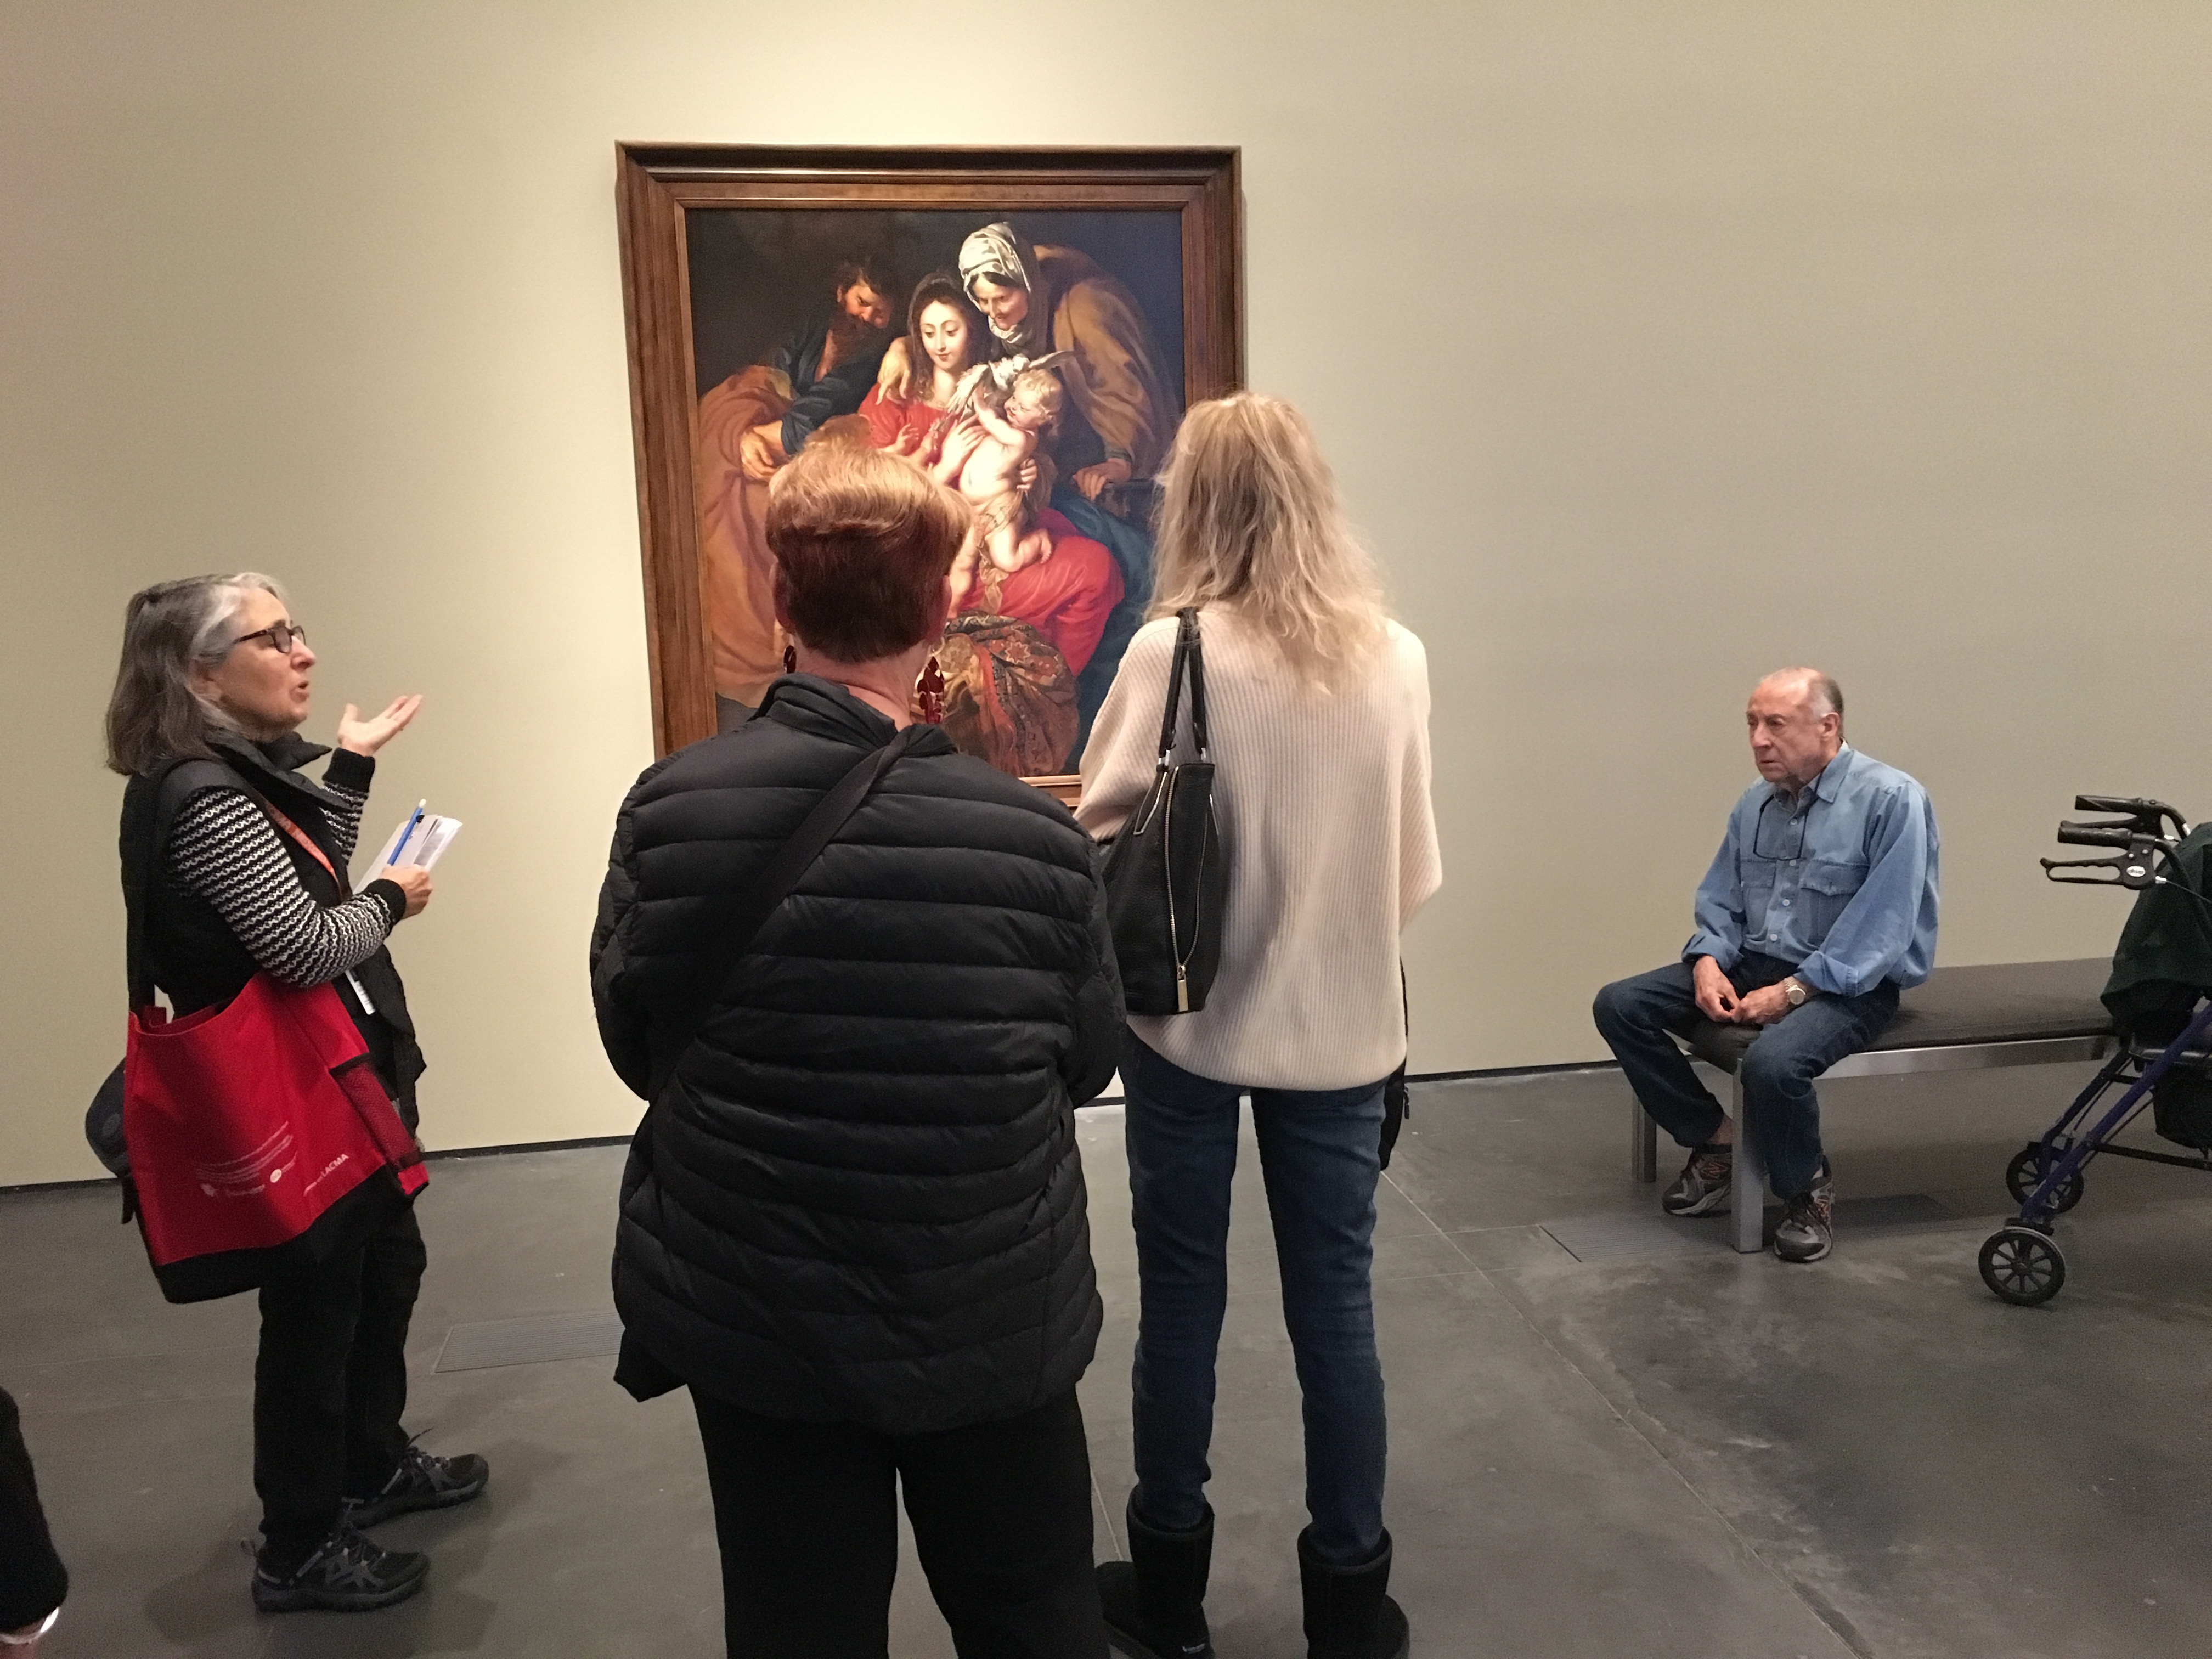 Tour participants engage in conversation around Peter Paul Rubens's The Holy Family with St. Elizabeth, St. John, and a Dove in To Rome and Back: Individualism and Authority in Art, 1500–1800.